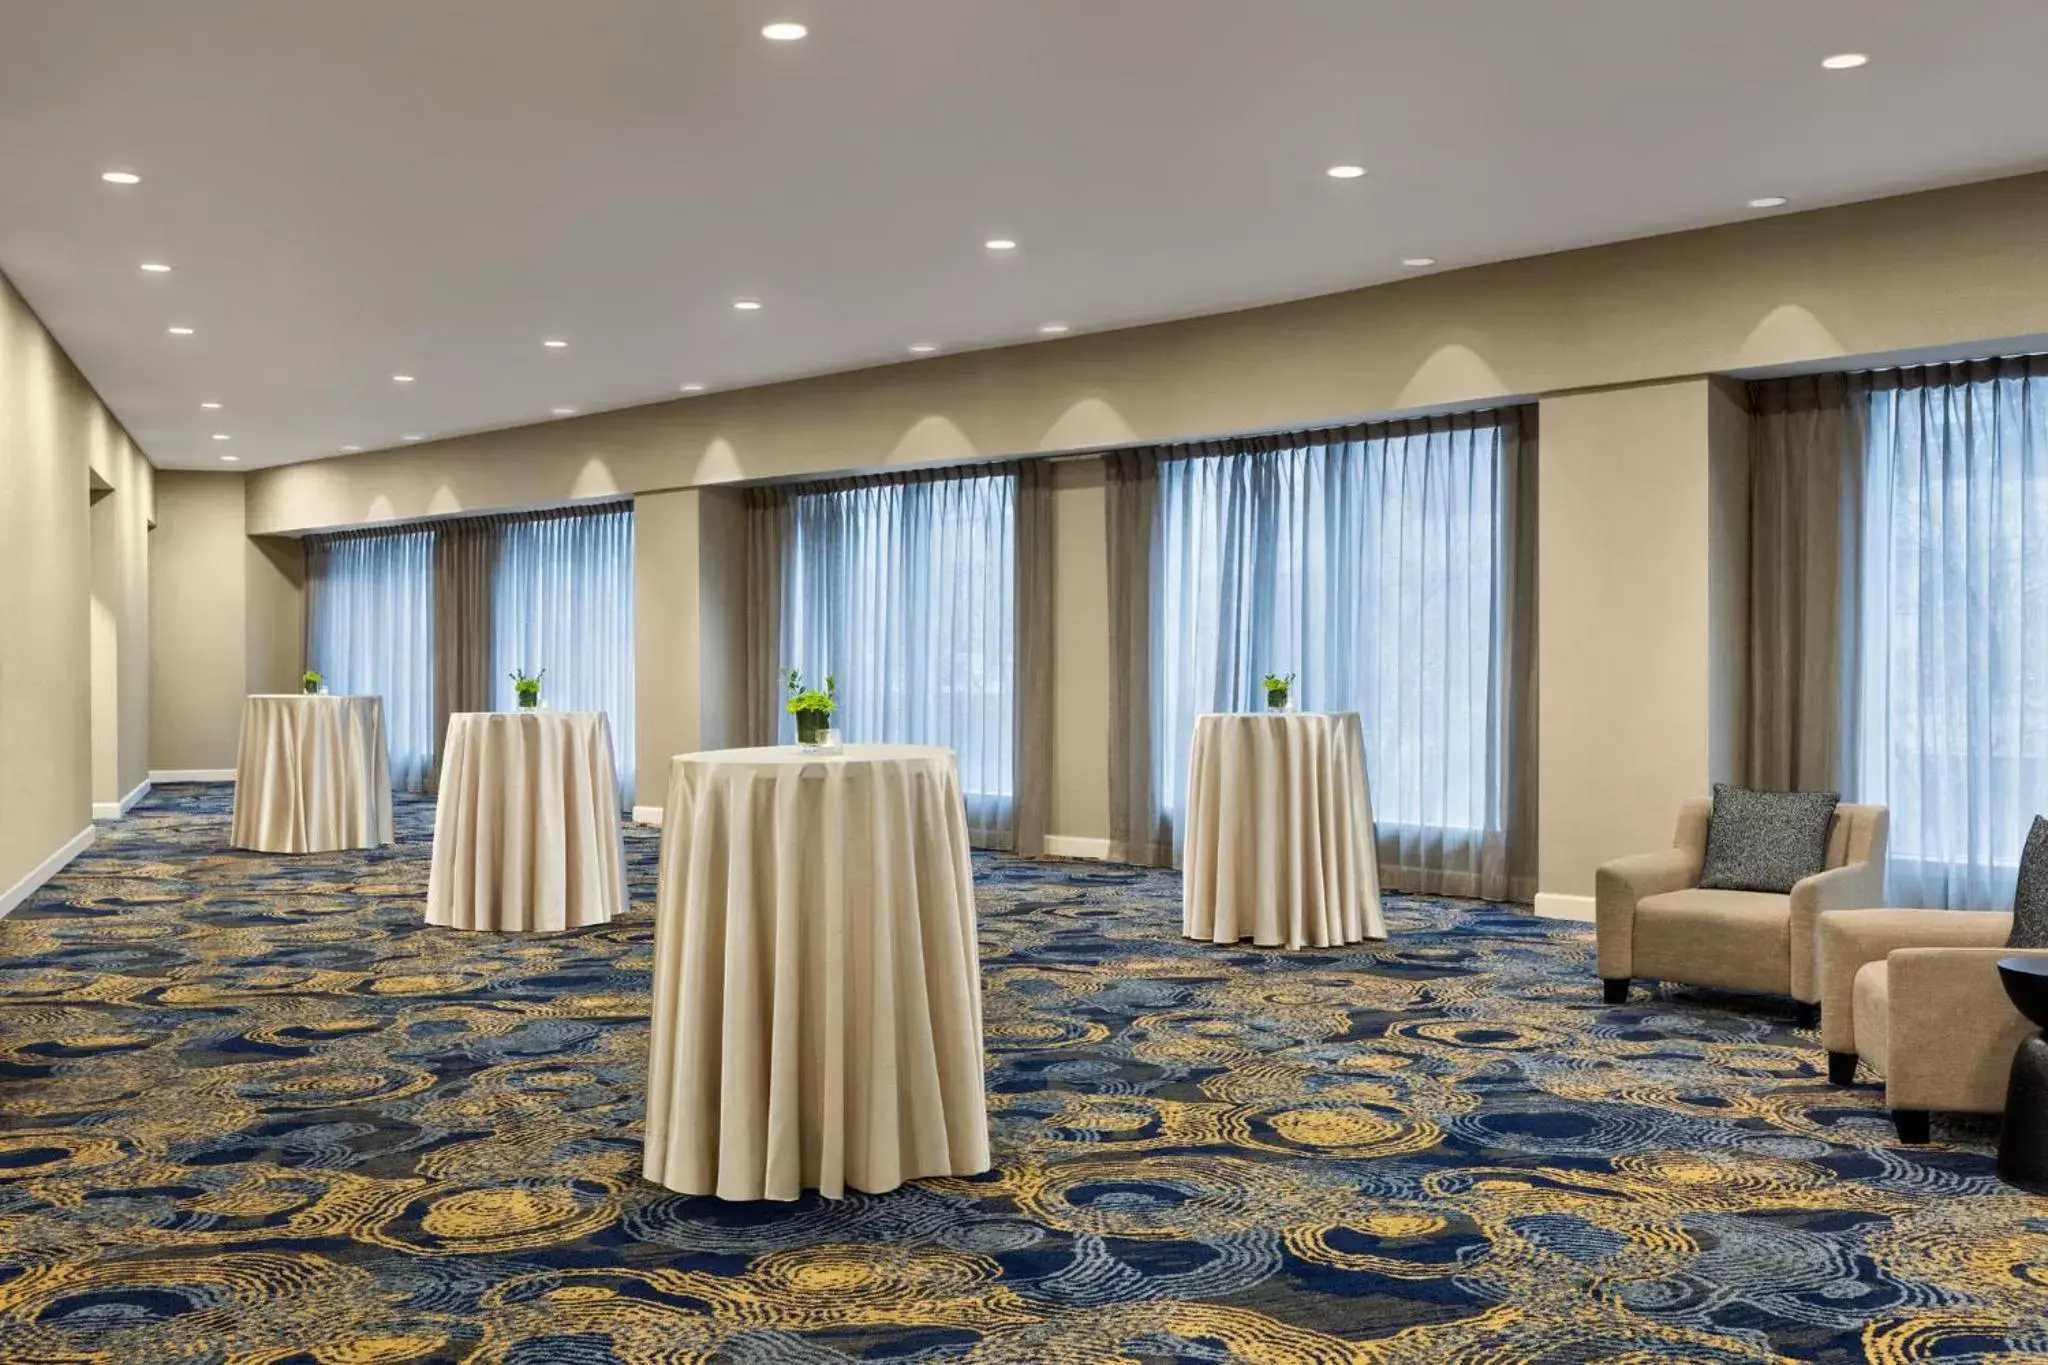 Meeting/conference room, Banquet Facilities in Crowne Plaza Cleveland at Playhouse Square, an IHG Hotel